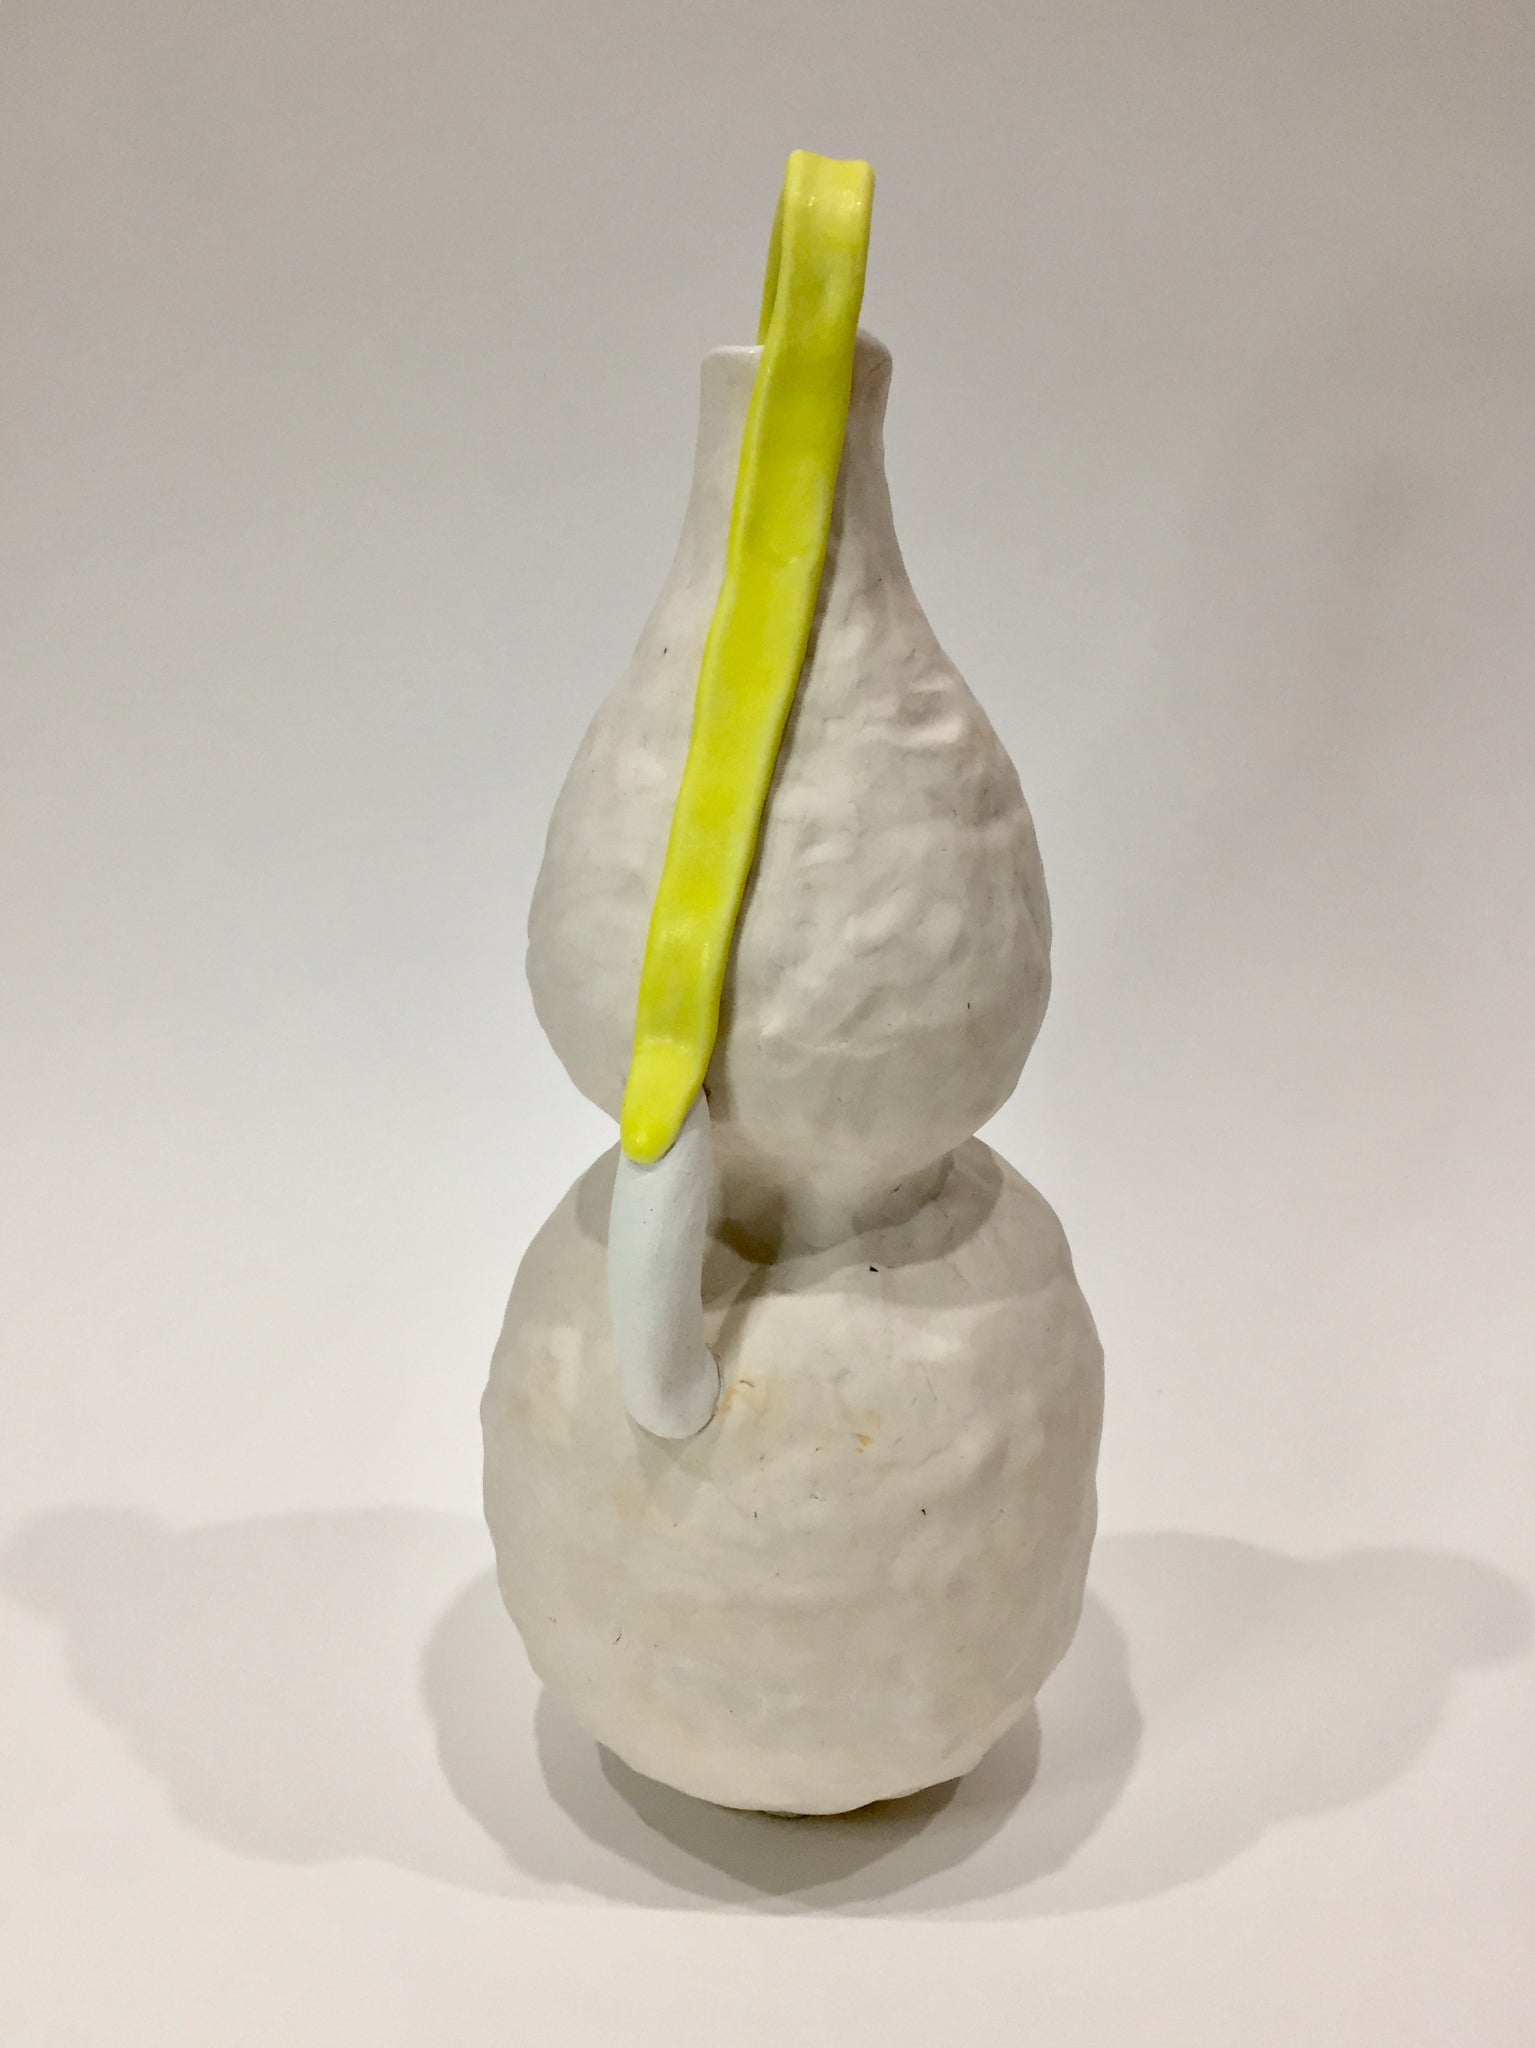 "Vase (Gourd Shape with Yellow Nail)"